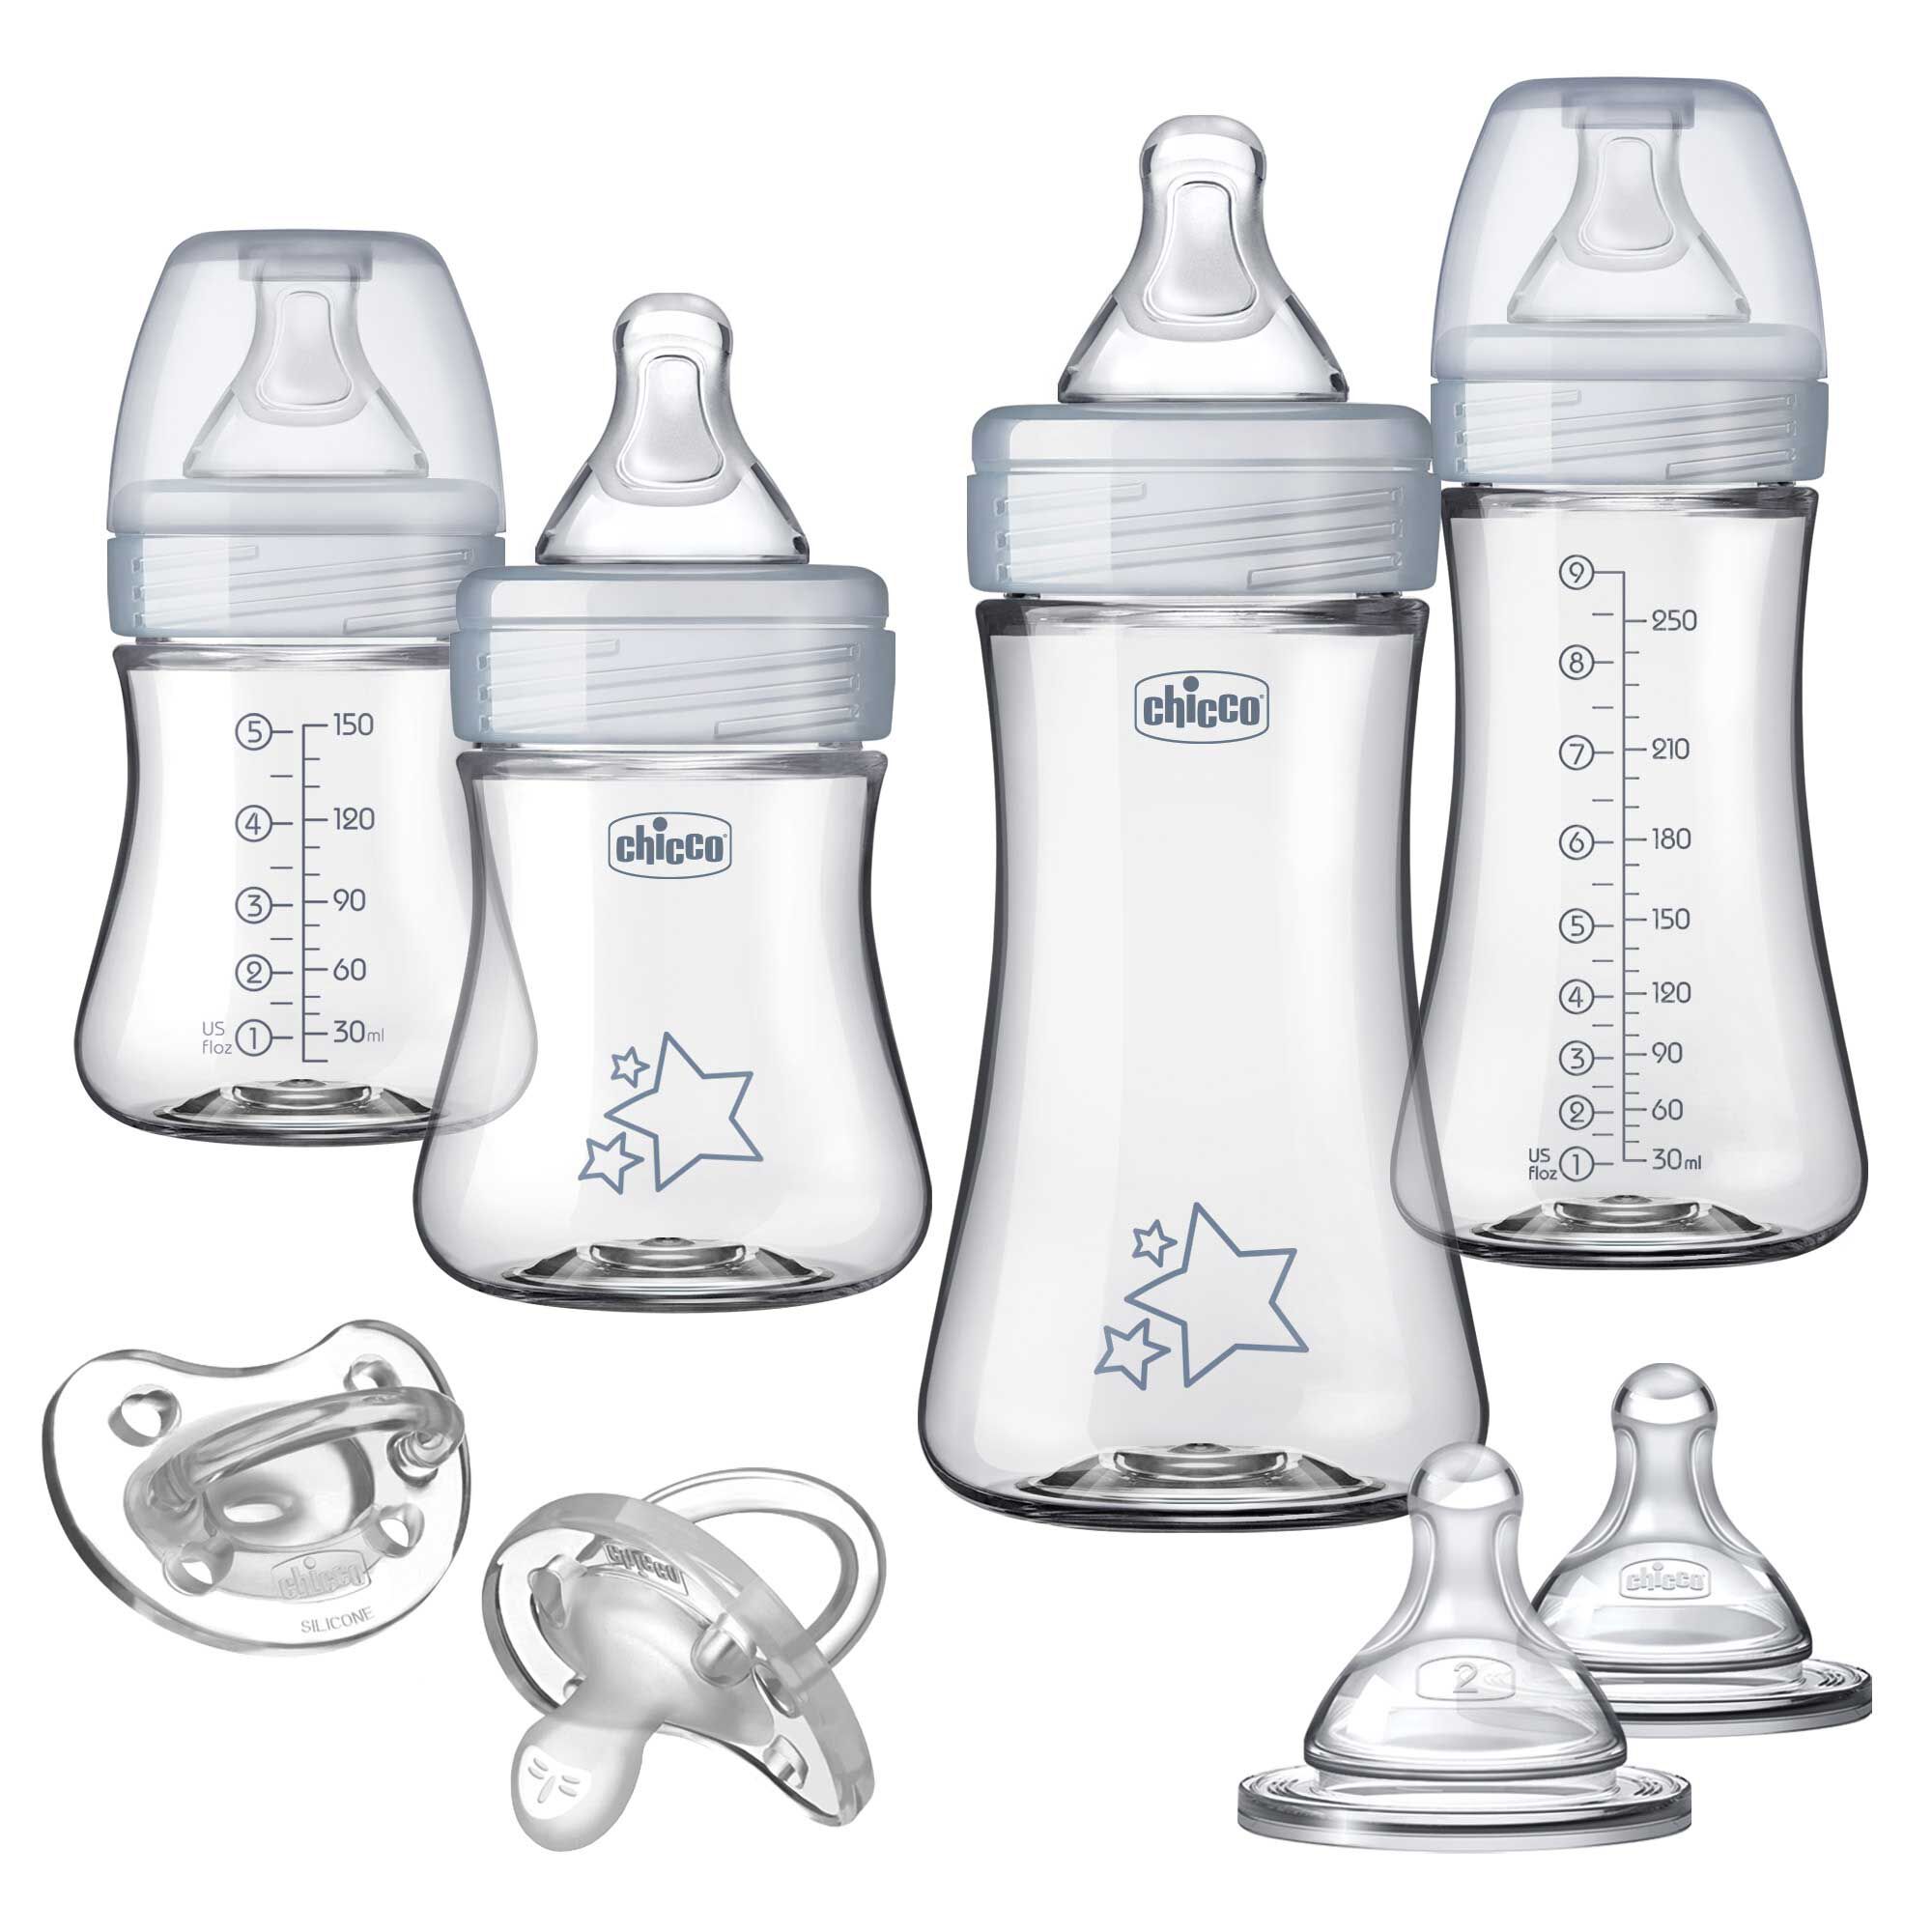 Perfect for Breastfeeding Mothers Soft Silicone Shield Manual Breast Pump BPA Free with Bottle Adapter for Narrow and Wide Neck Bottles Includes 2 x 4 Ounce Feeding Bottles 